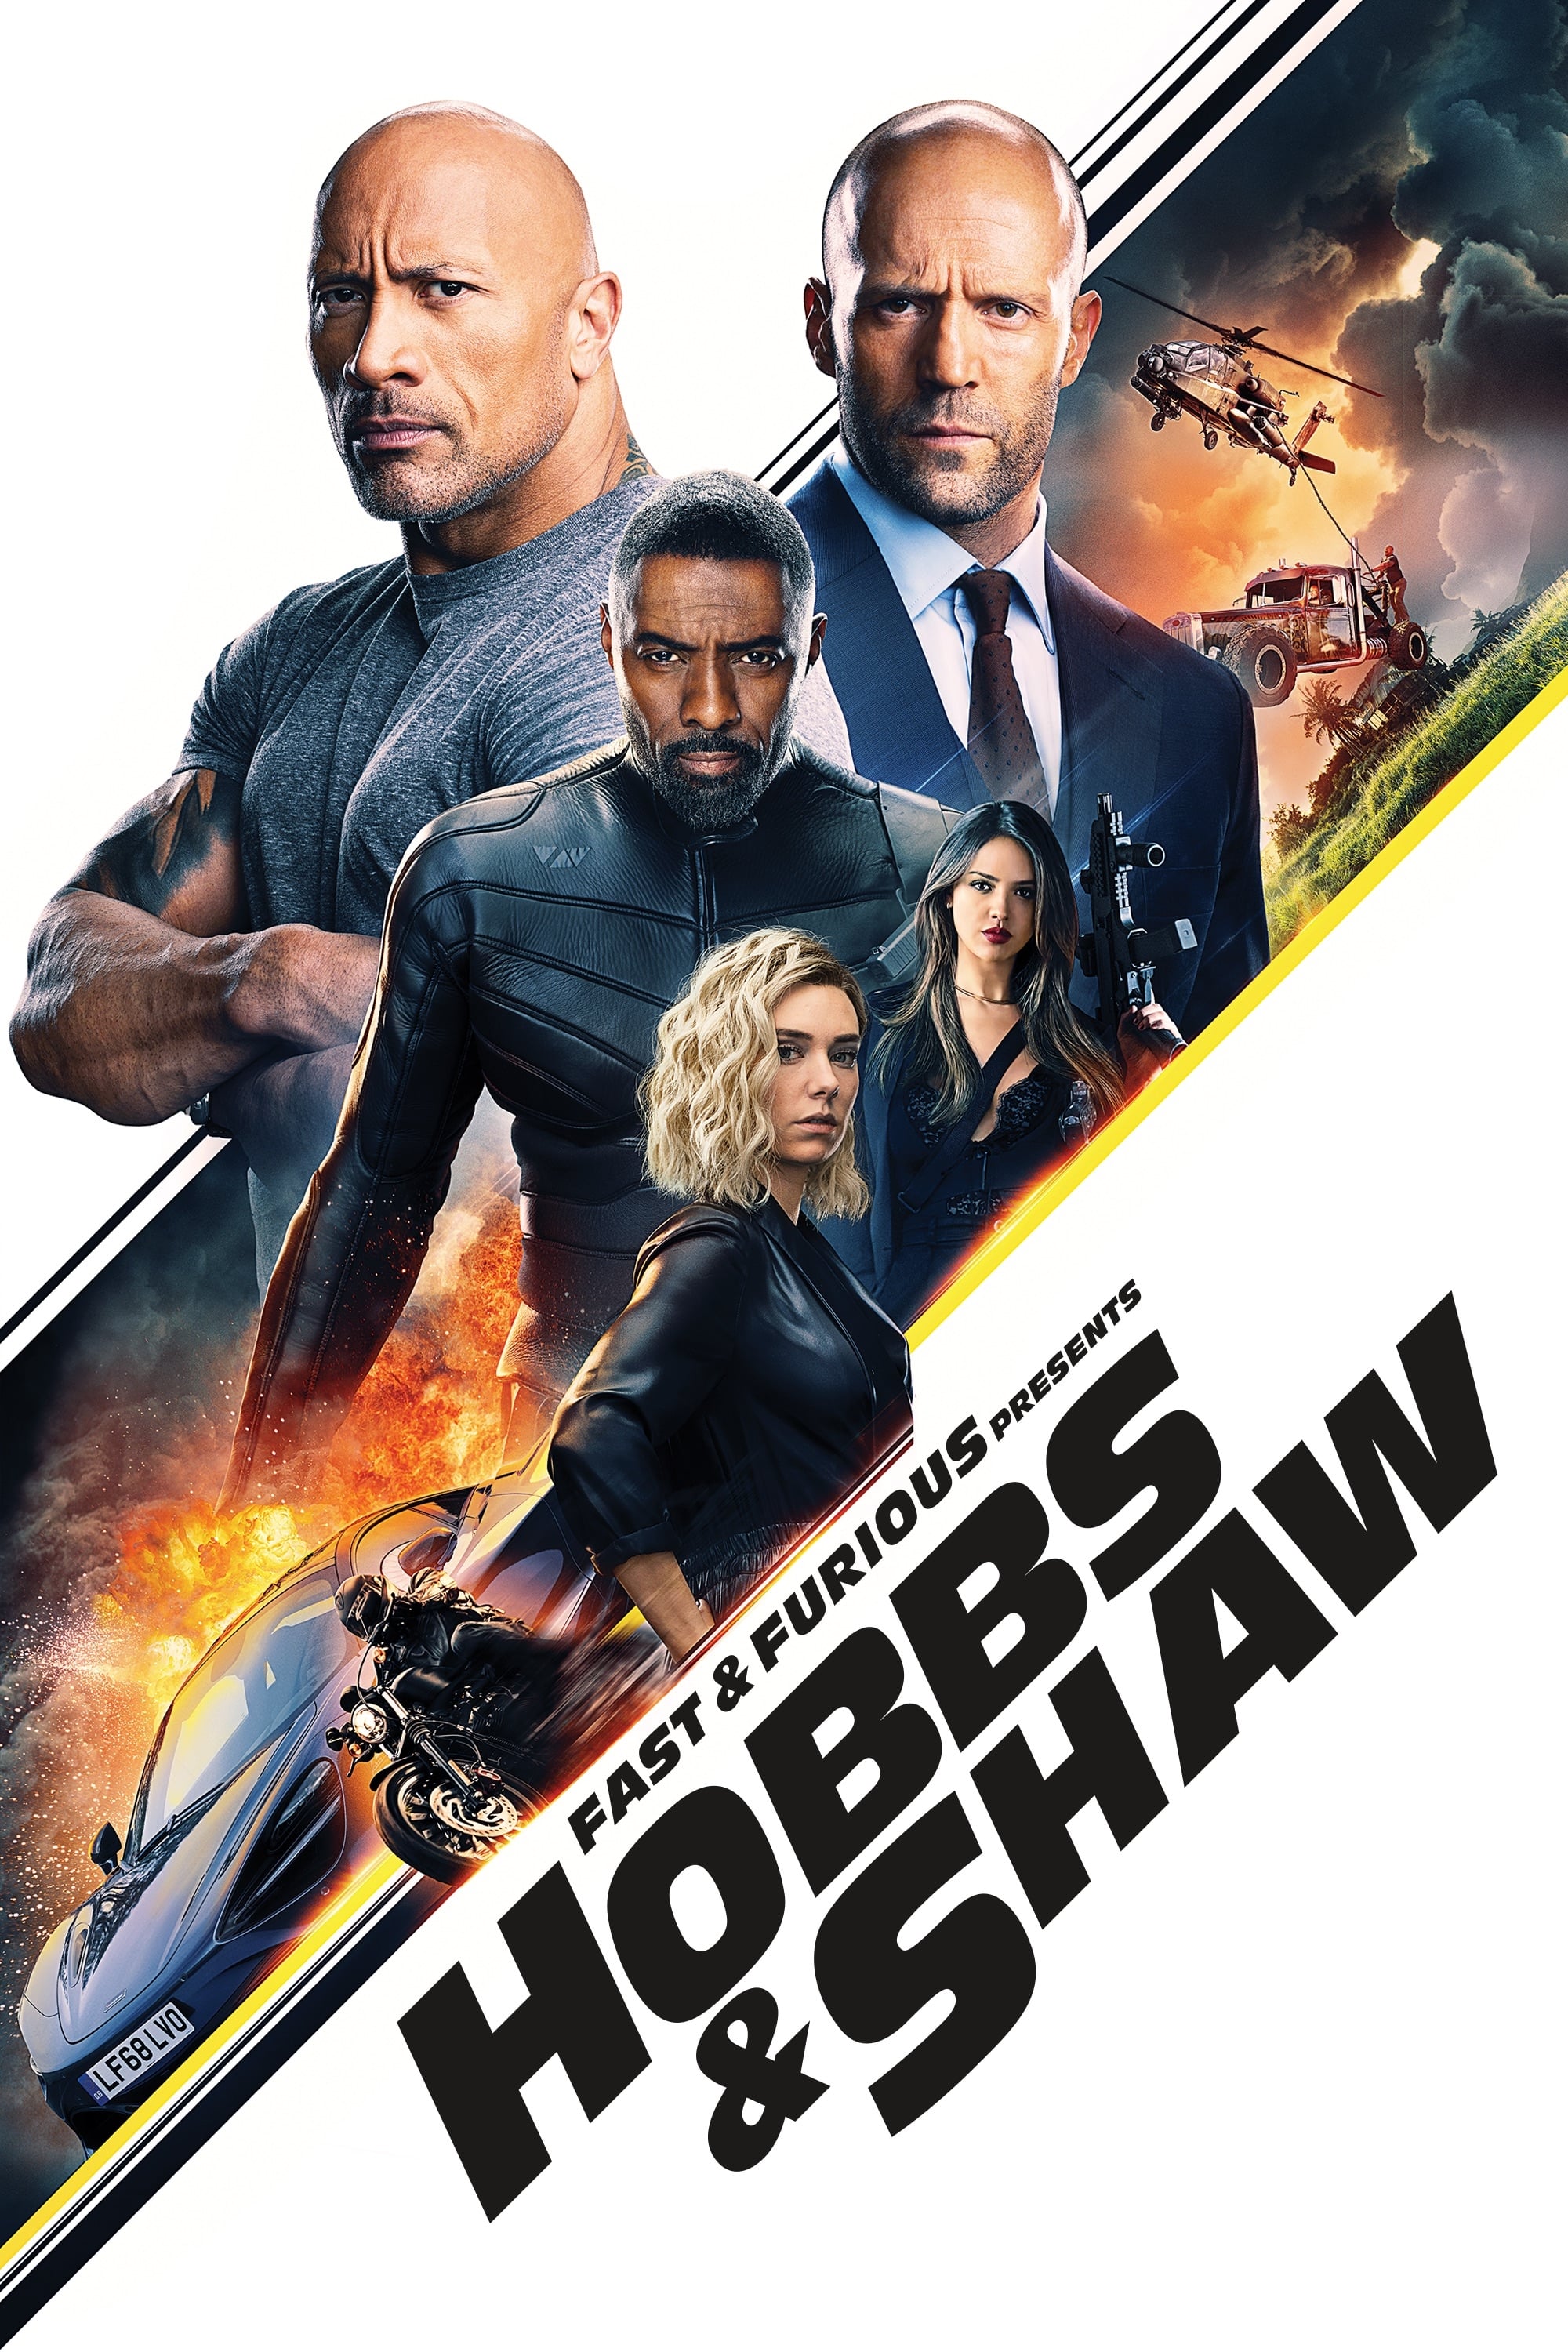 Fast & Furious Presents: Hobbs & Shaw Cast And Crew